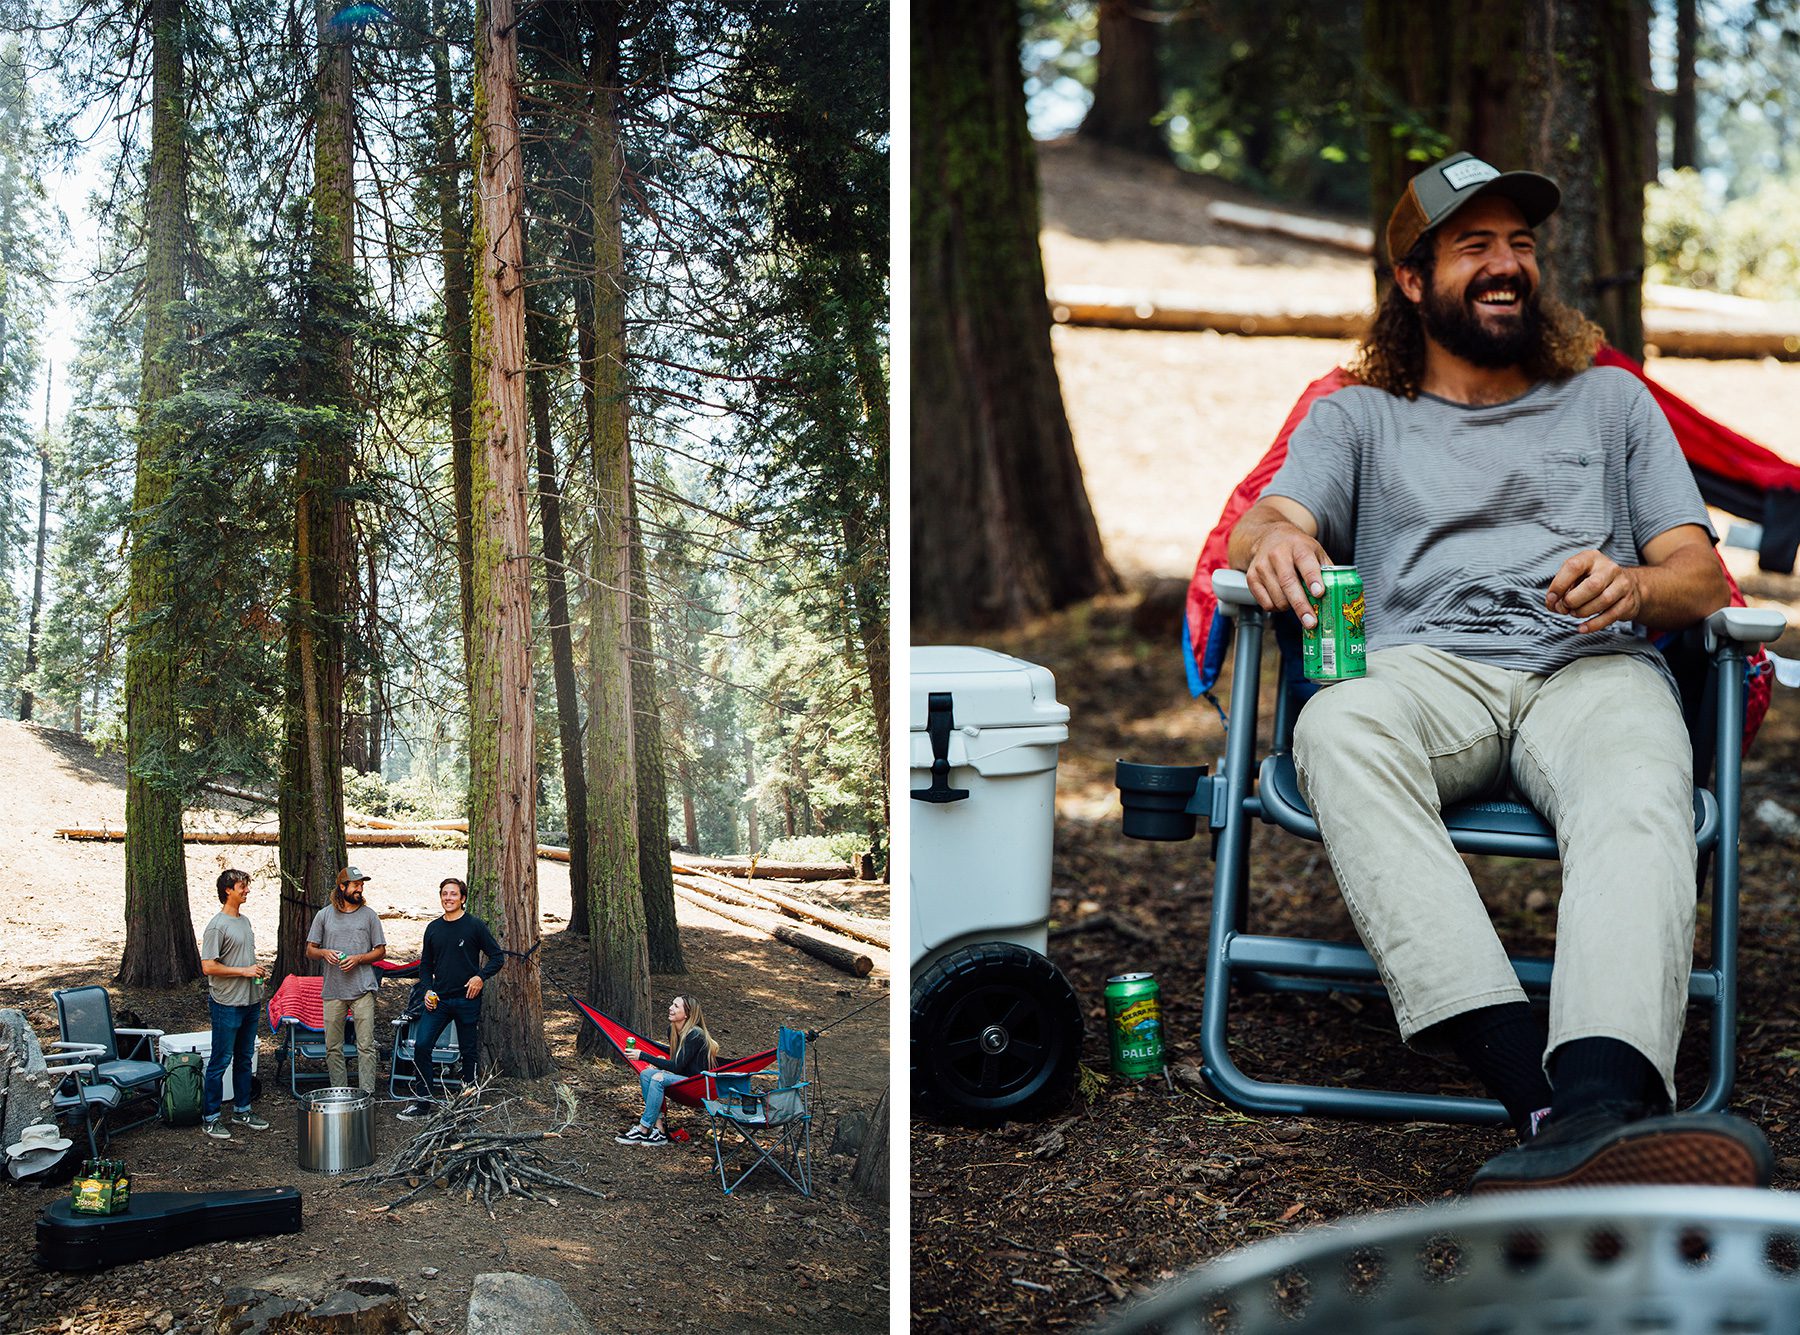 A group of friends relaxing with Sierra Nevada beers at a campsite